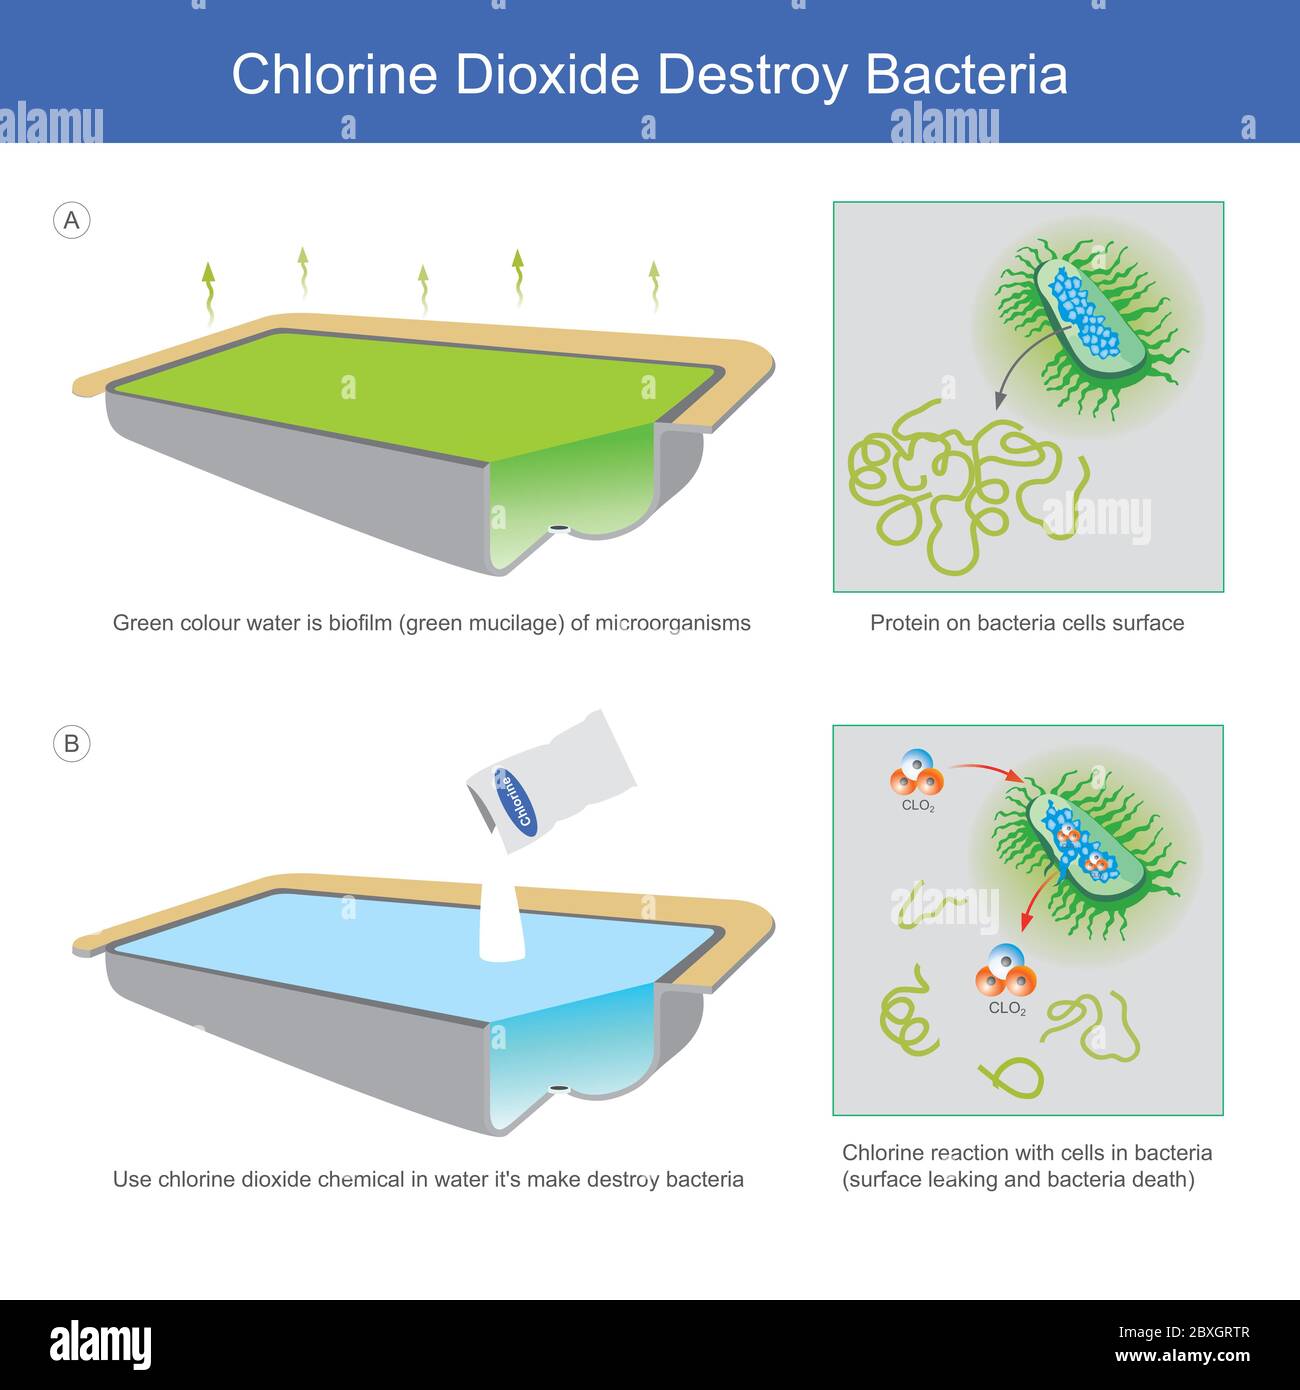 Chlorine Dioxide Destroy Bacteria. Illustration explain water sources in which bacteria mucilage until all green colour water And the removal of bacte Stock Vector